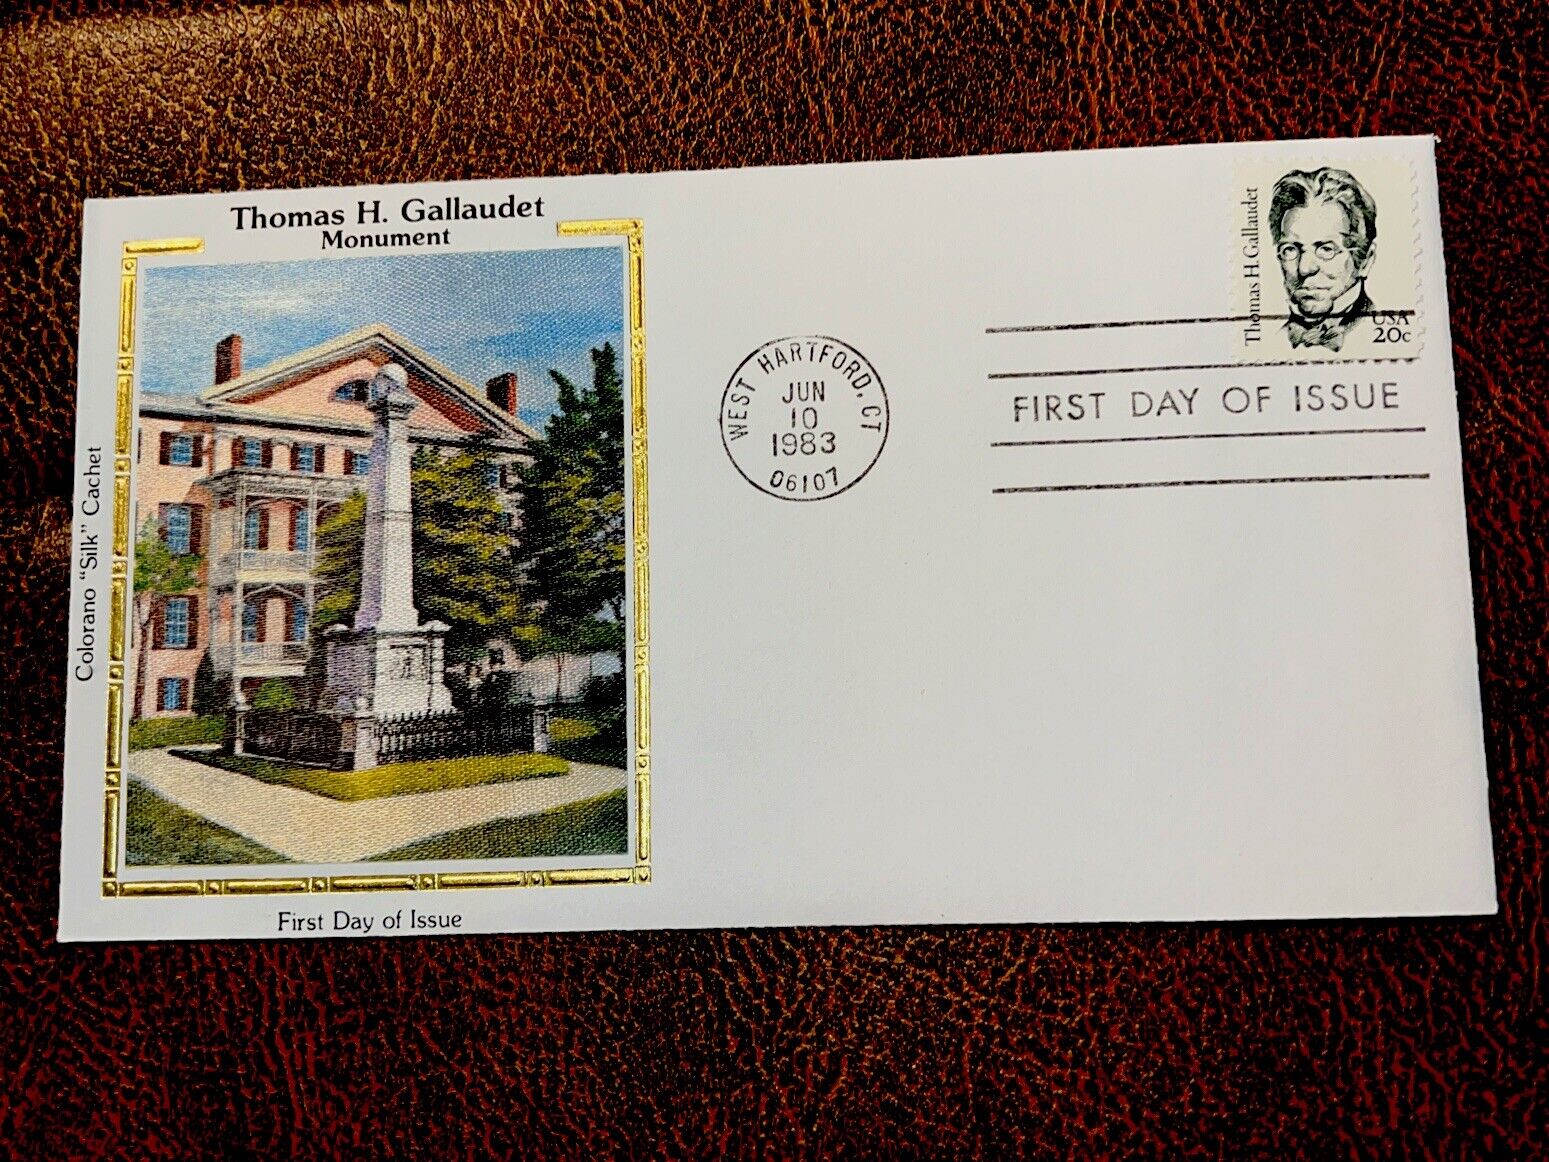 Honoring Thomas Gallaudet &   First Day Cover of the Gallaudet University stamp 